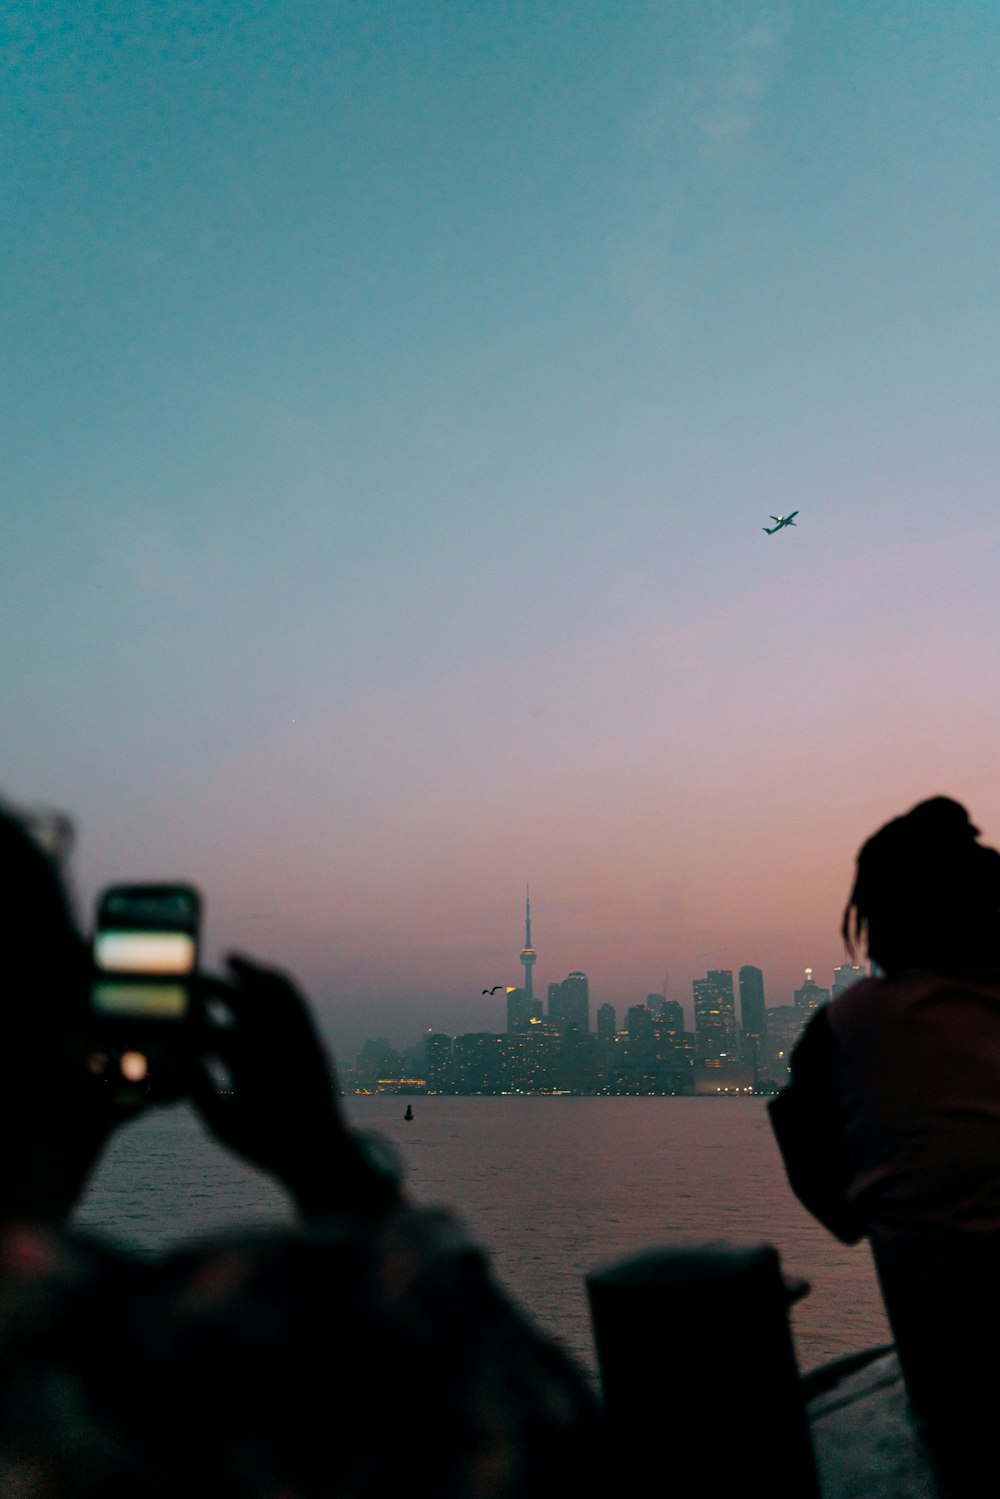 a person taking a picture of a plane in the sky